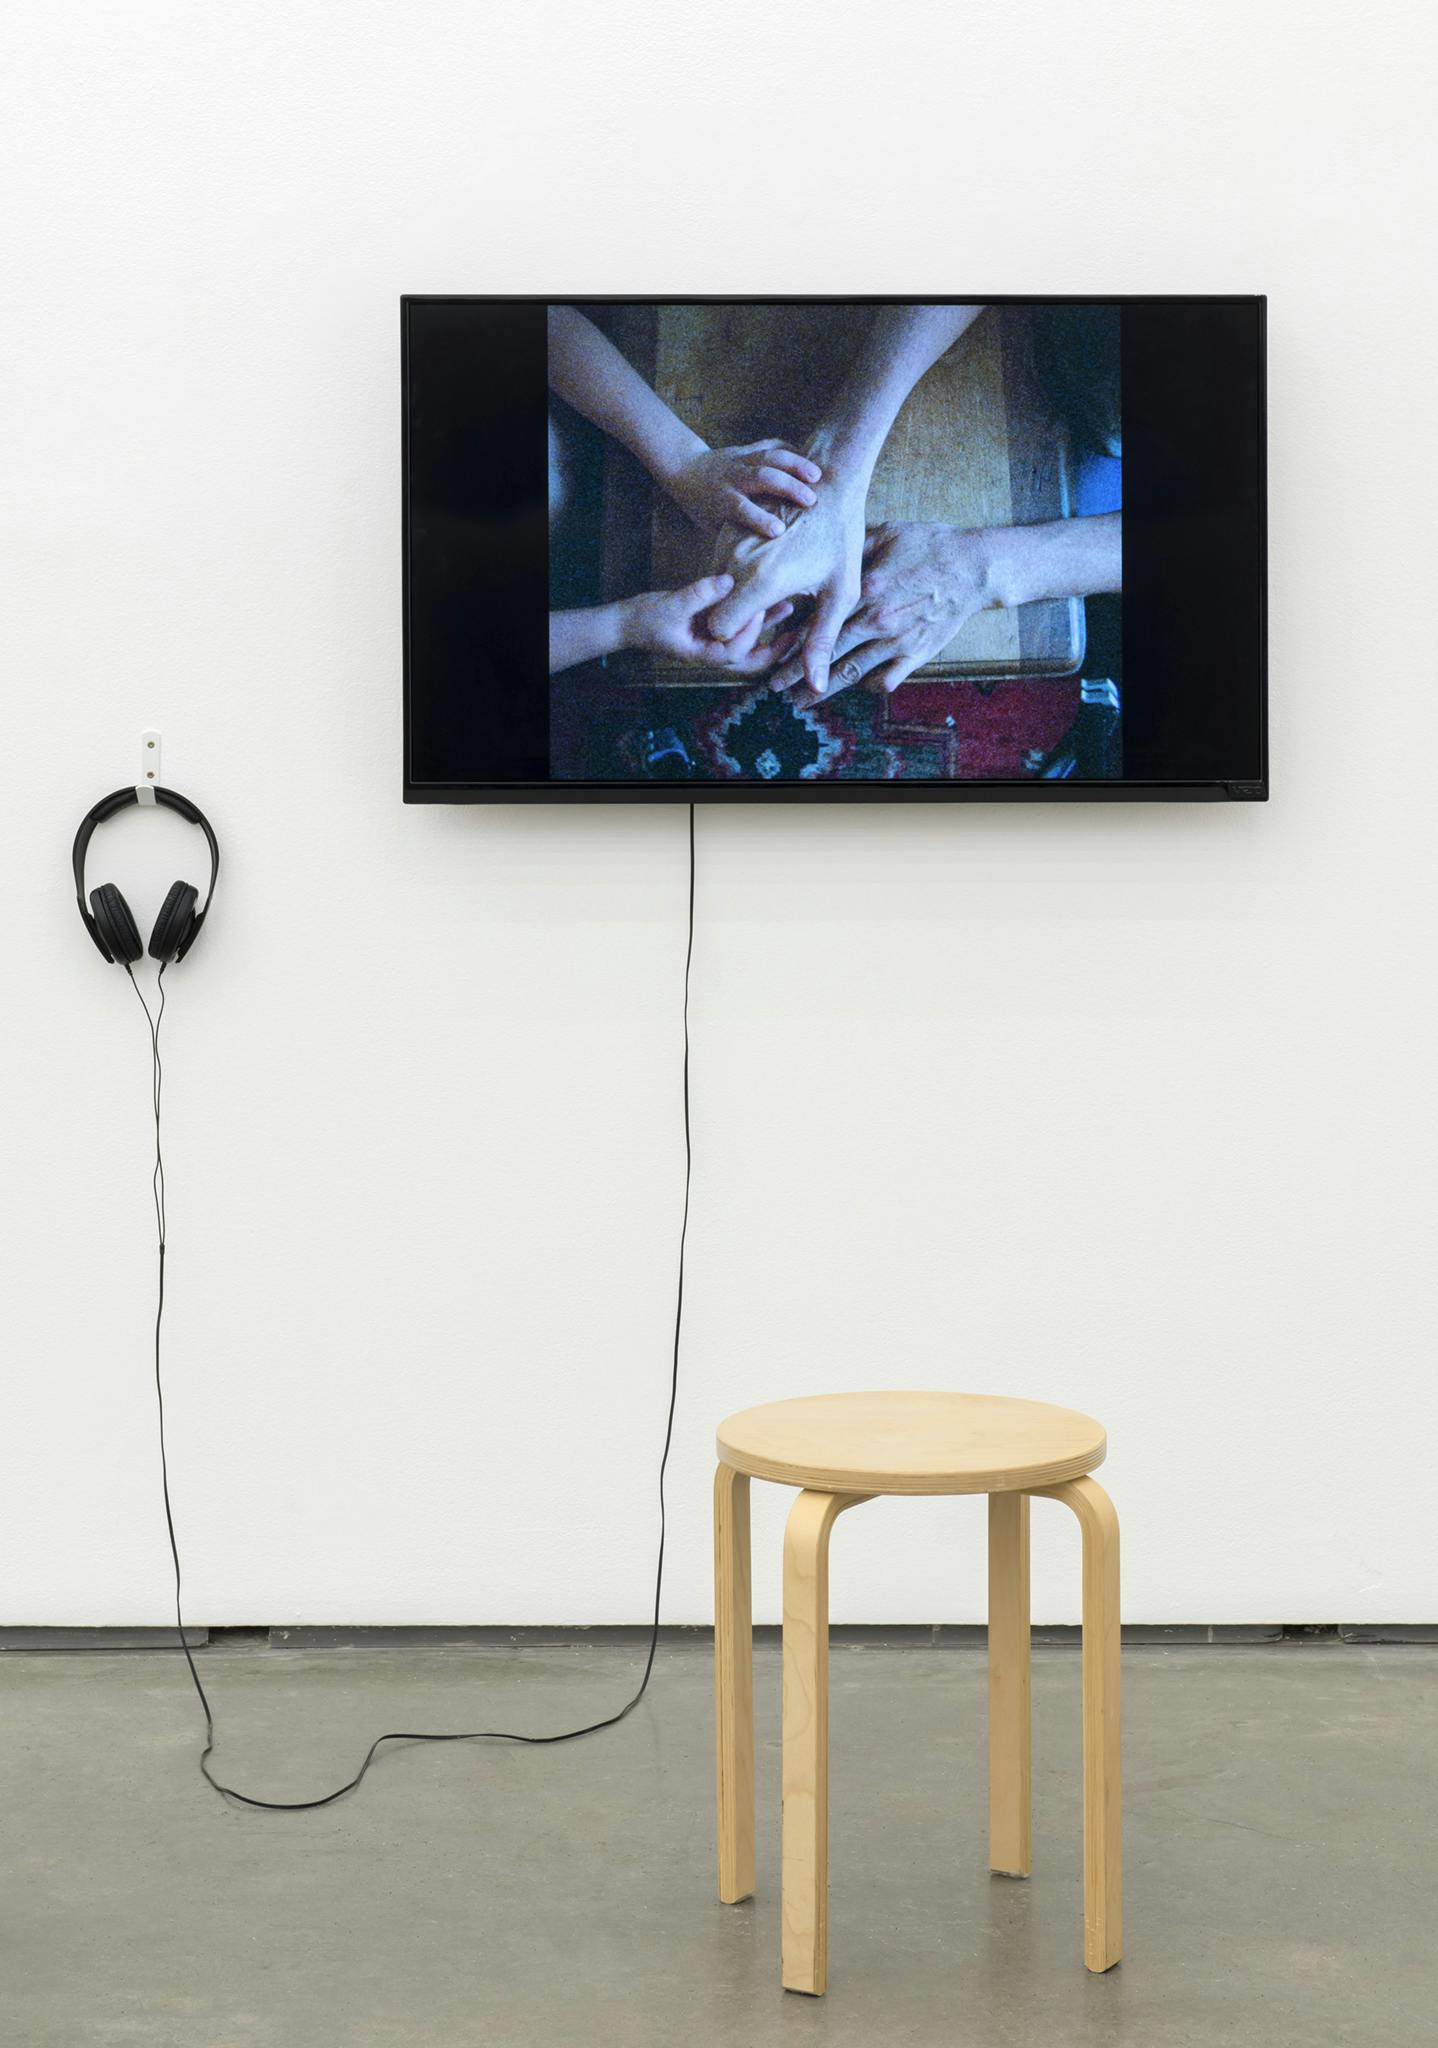 A TV monitor hangs on the wall with a pair of headphones hanging beside it to the left. There is a wooden stool in front of the monitor. The video  on the screen shows four hands holding each other.  